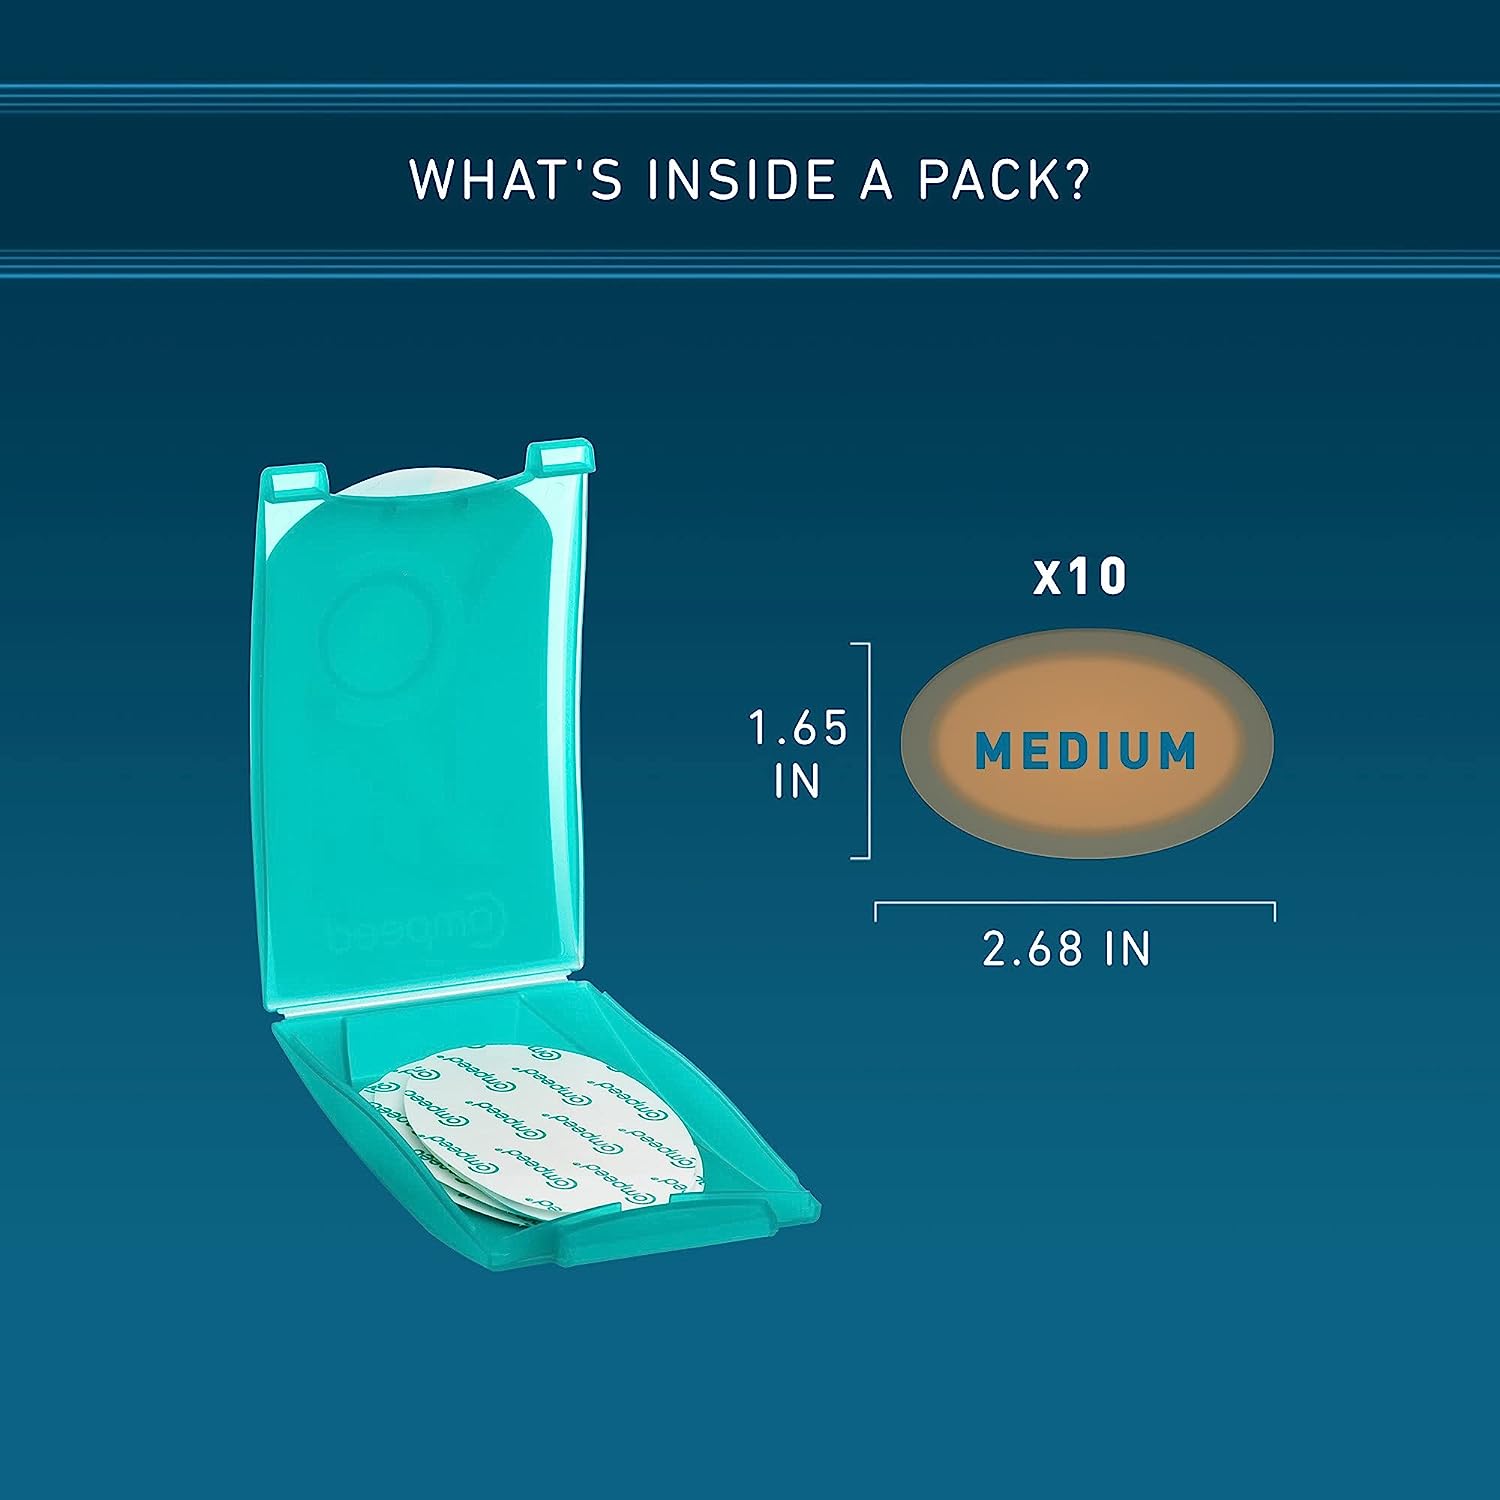 A blue graphic with white letters describing the size of Compeed's medium-size brown skin color blister patches as being 1.65 inches high and 2.68 inches long.